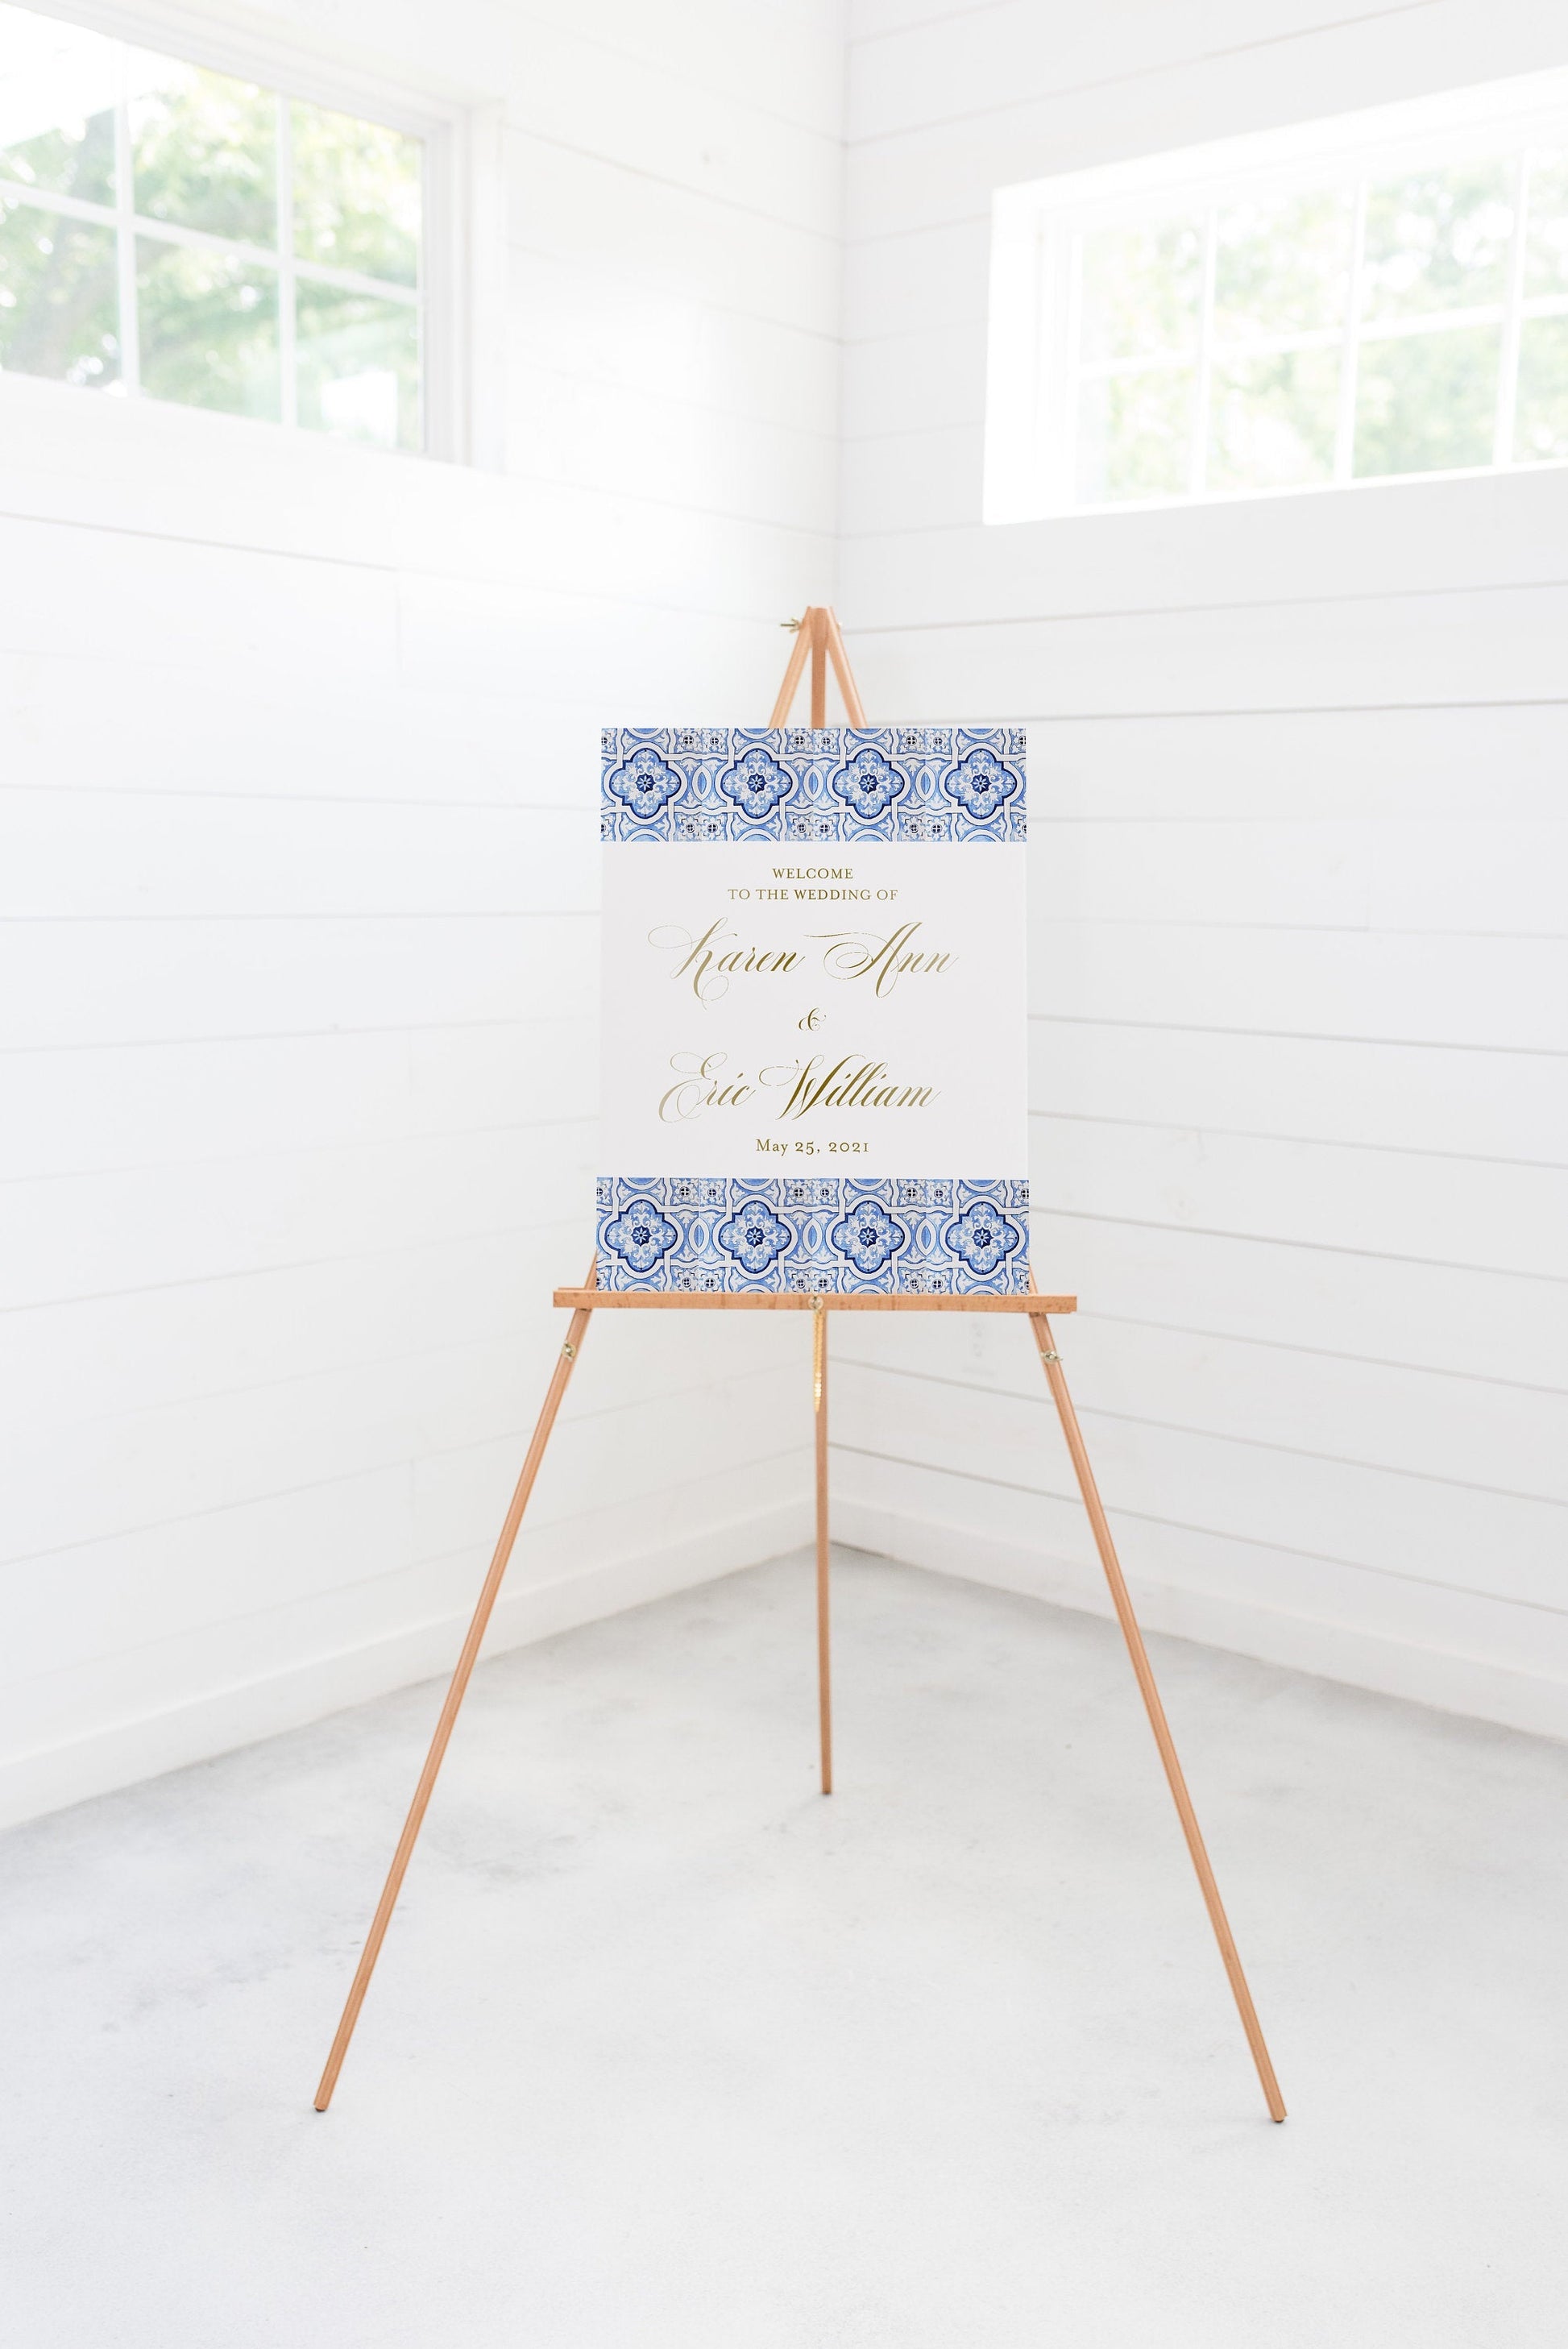 Mediterranean Wedding Welcome Sign Template, Tiles Wedding Welcome, Greek Wedding Welcome, Printable Welcome Sign, Editable Templett  - JUDY  SAVVY PAPER CO